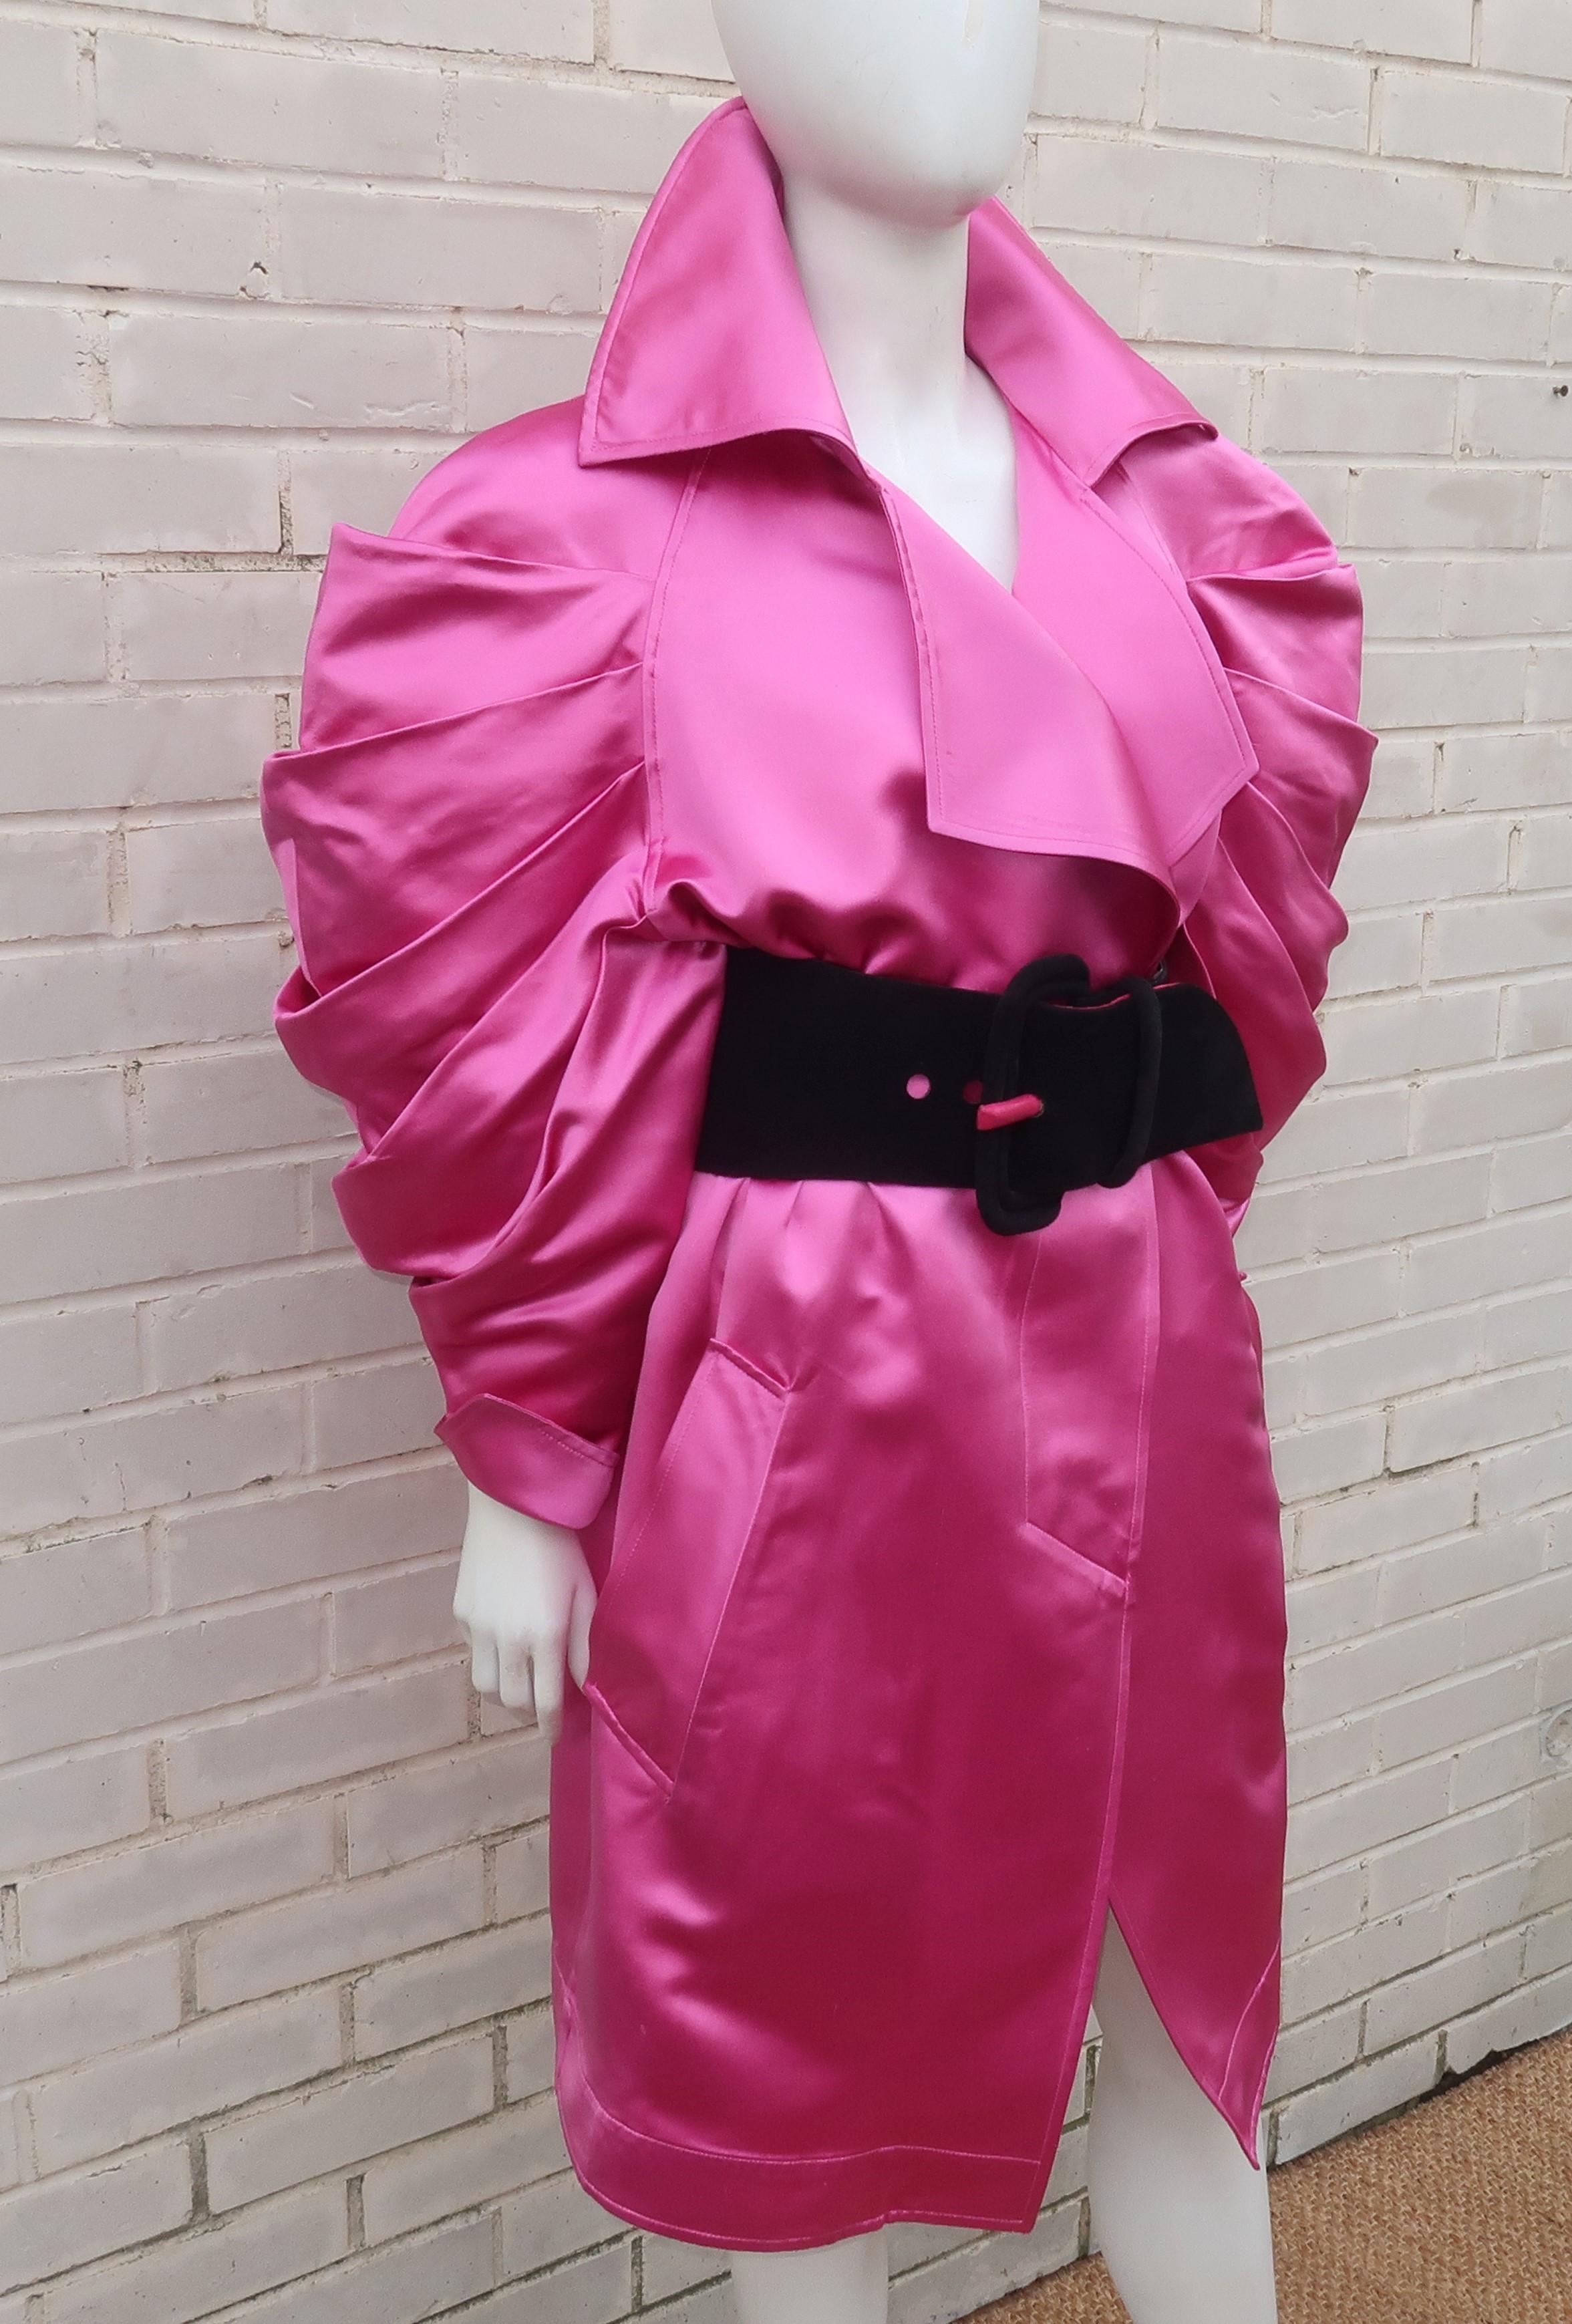 Women's Claude Montana Hot Pink Silk Satin Coat With Ruched Sleeves, 1980's